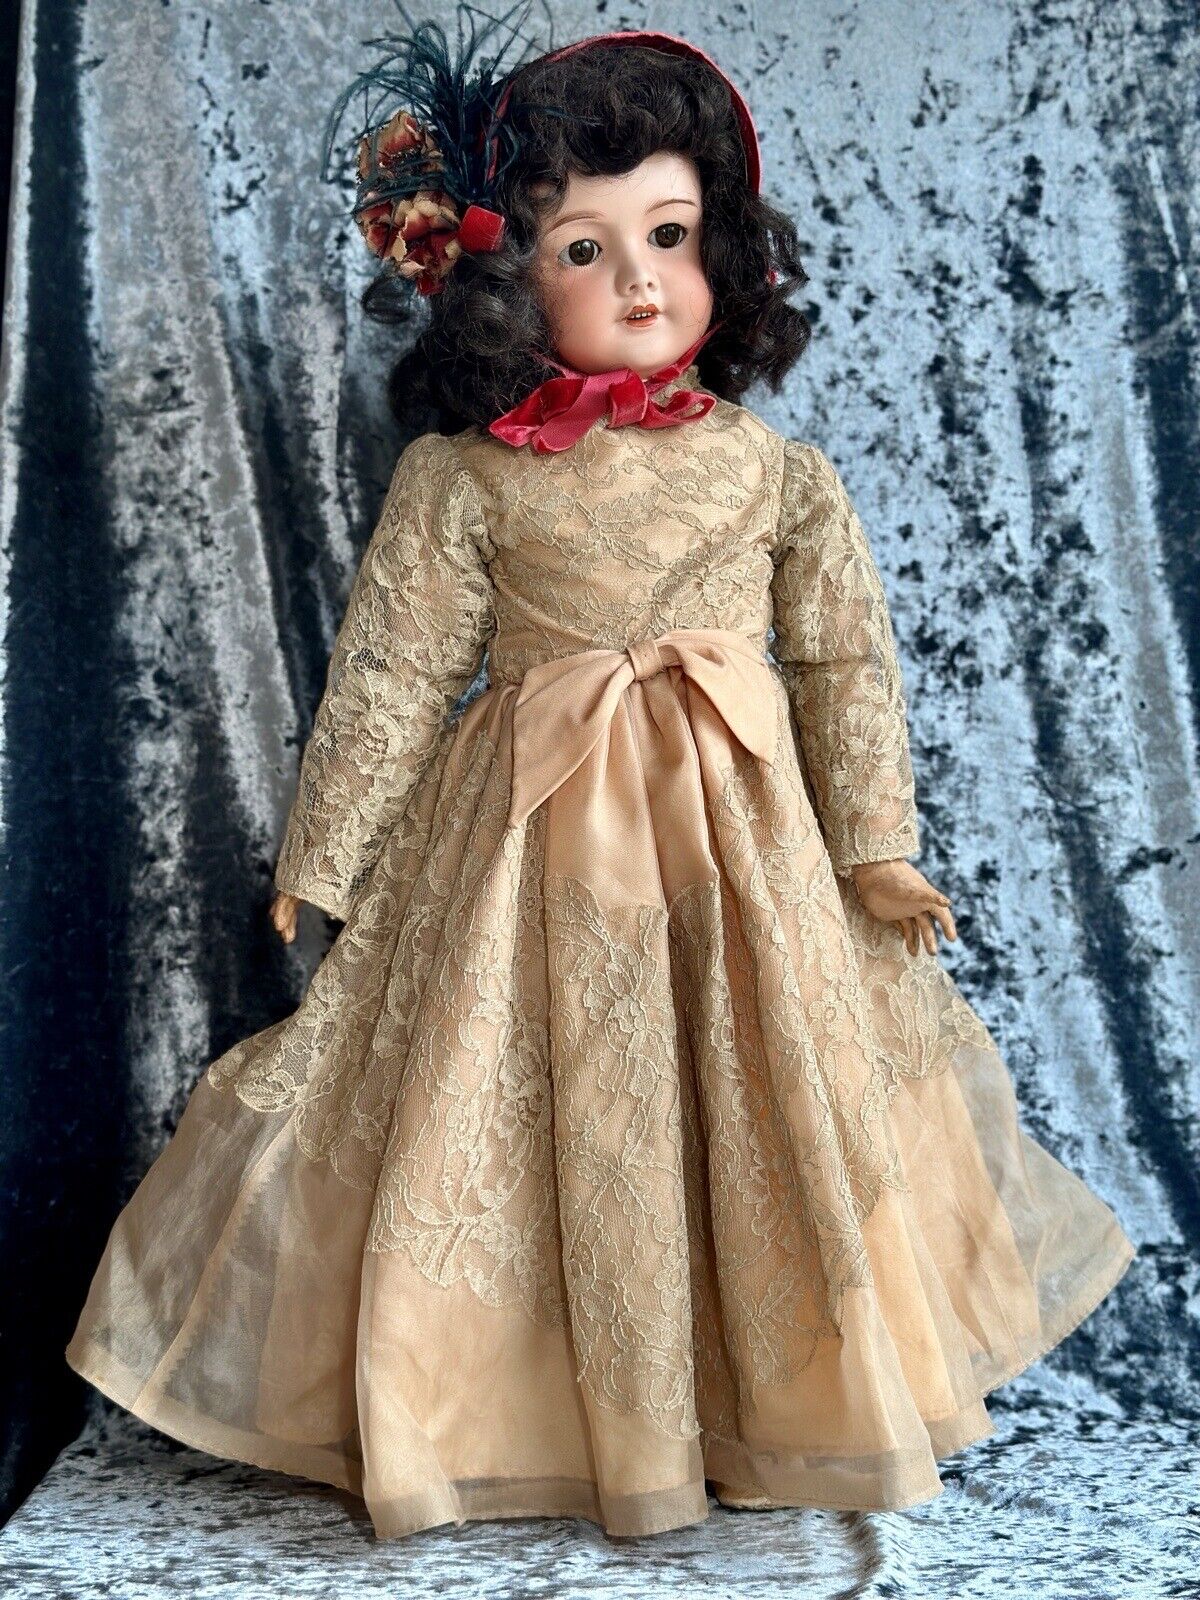 Large Antique French 27” SFBJ 301 Bisque Head Doll